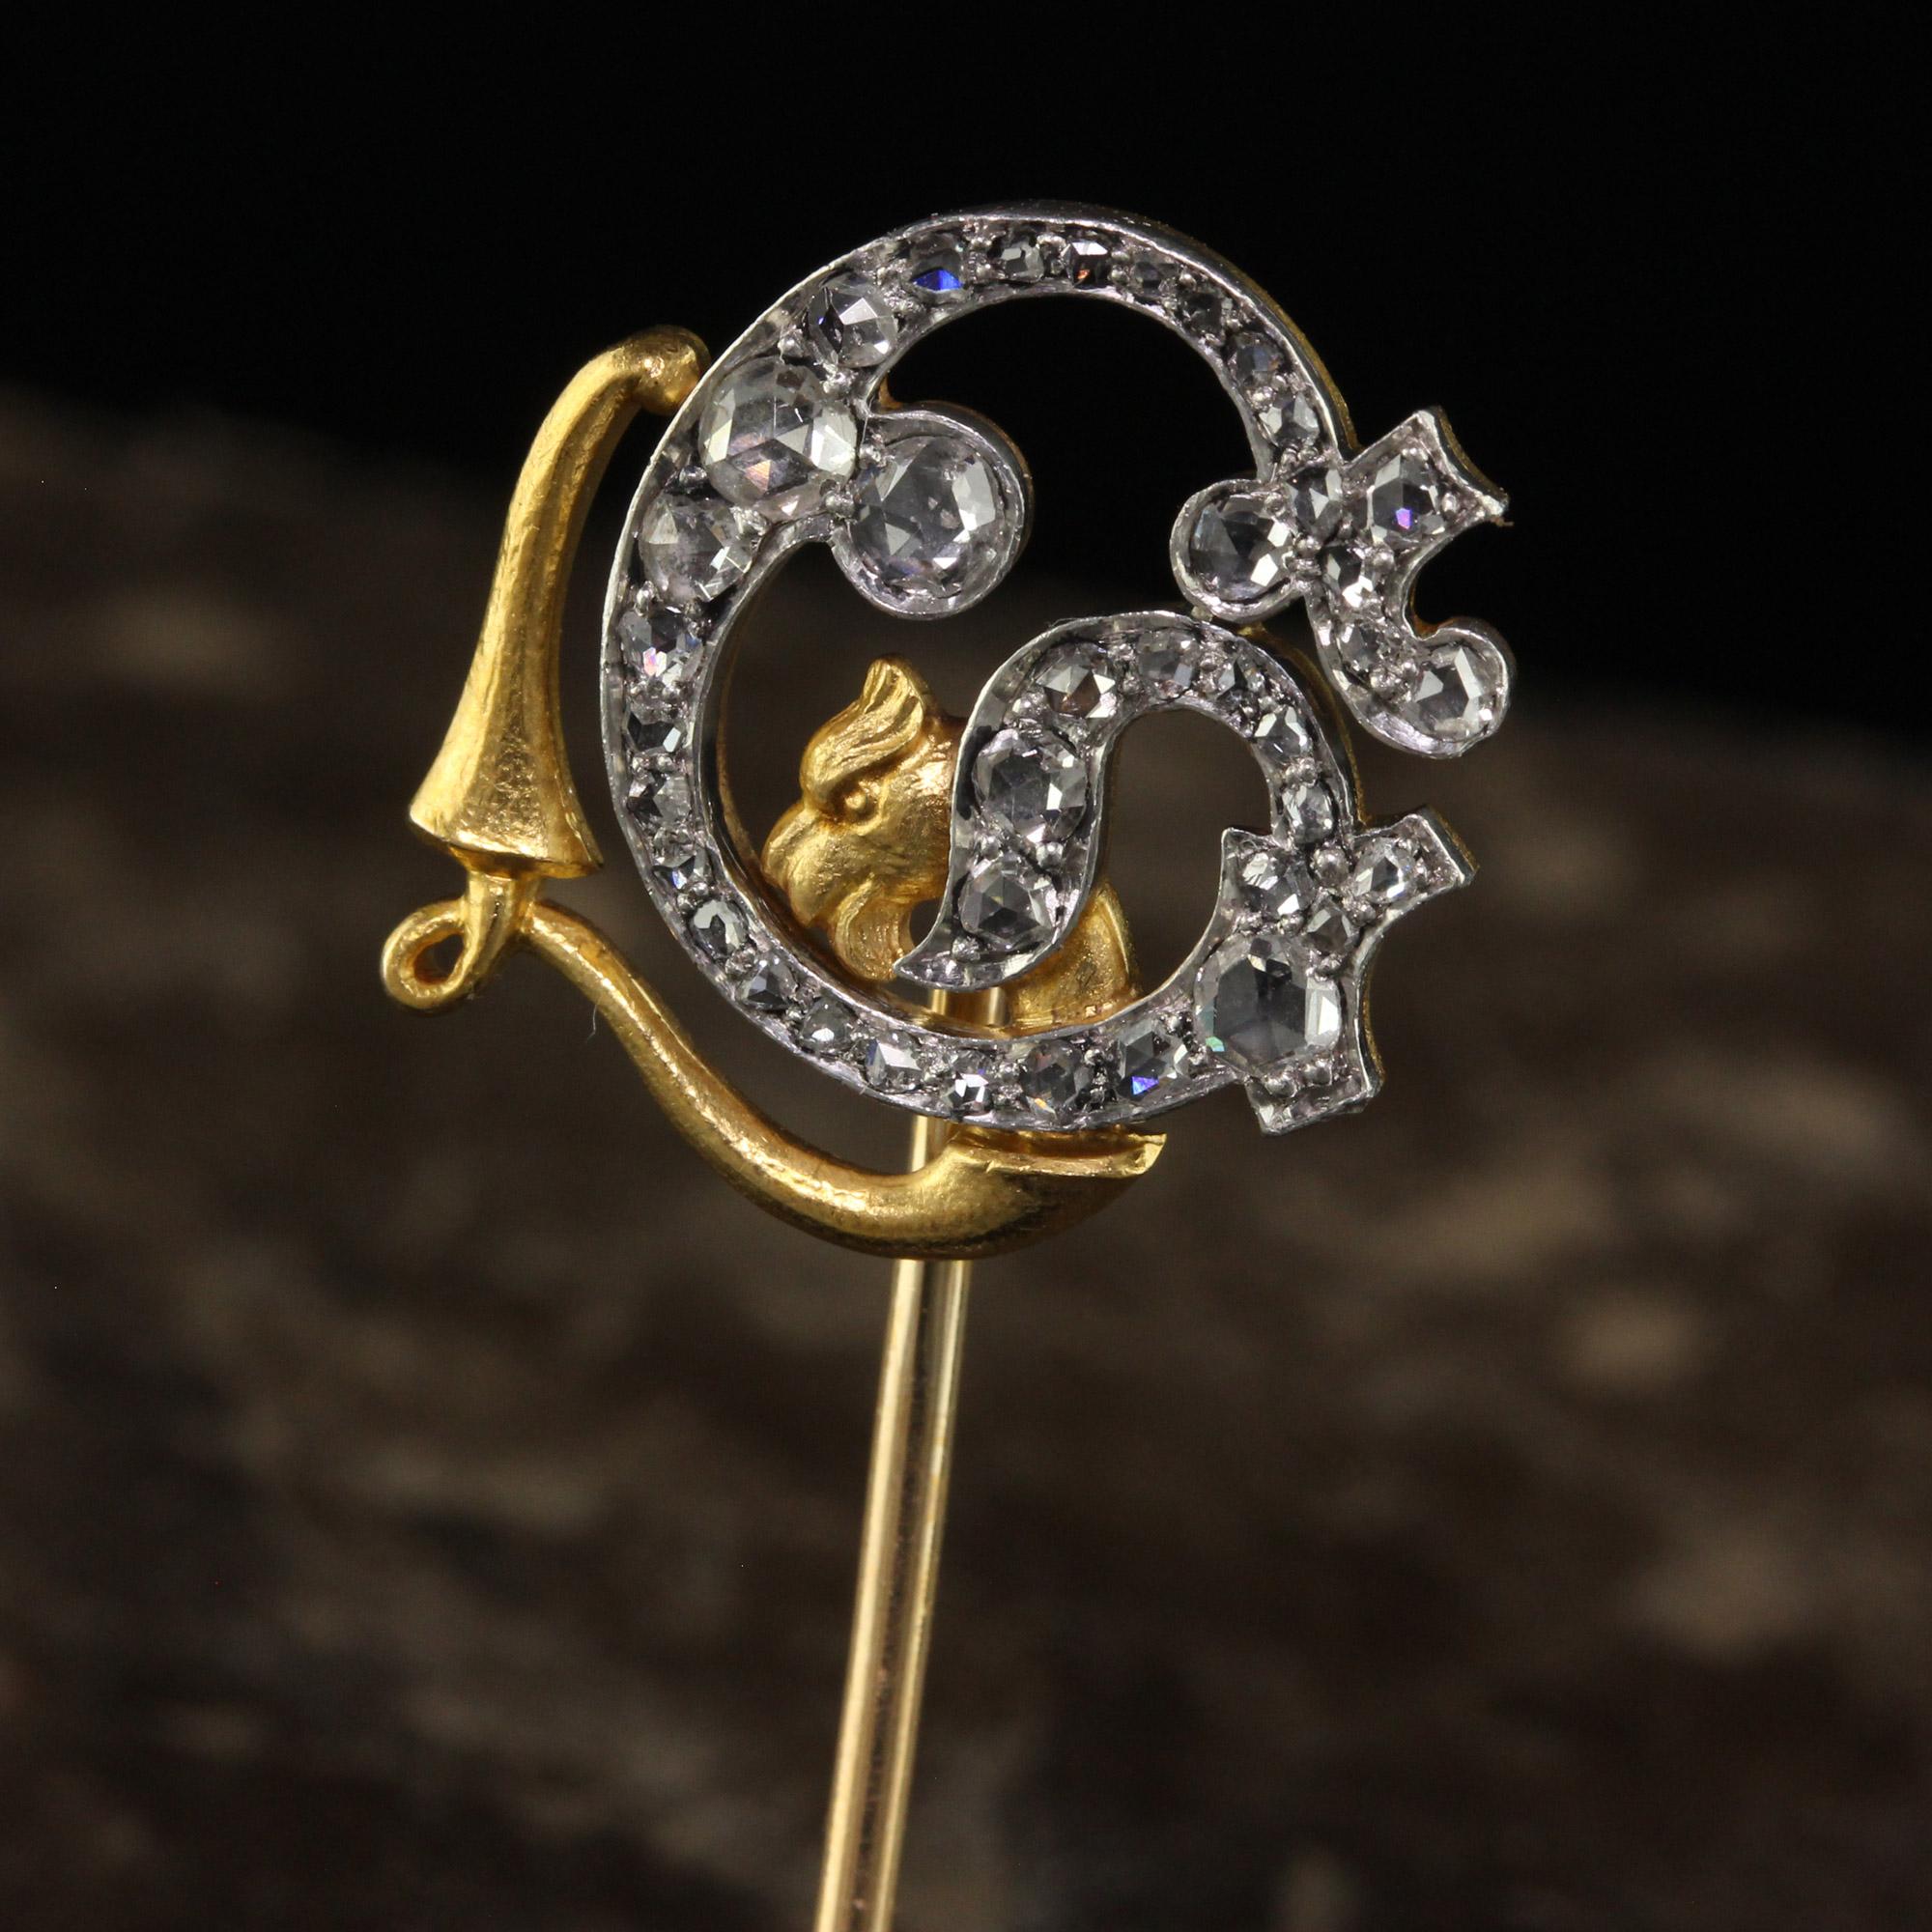 Beautiful Antique Edwardian Theodore B. Starr Rose Cut Diamond Griffin Stick Pin. This gorgeous Art Deco stick pin is crafted in 18k yellow gold and platinum. The top of the stick pin has gorgeous rose cut diamonds with a head of a griffin. The top